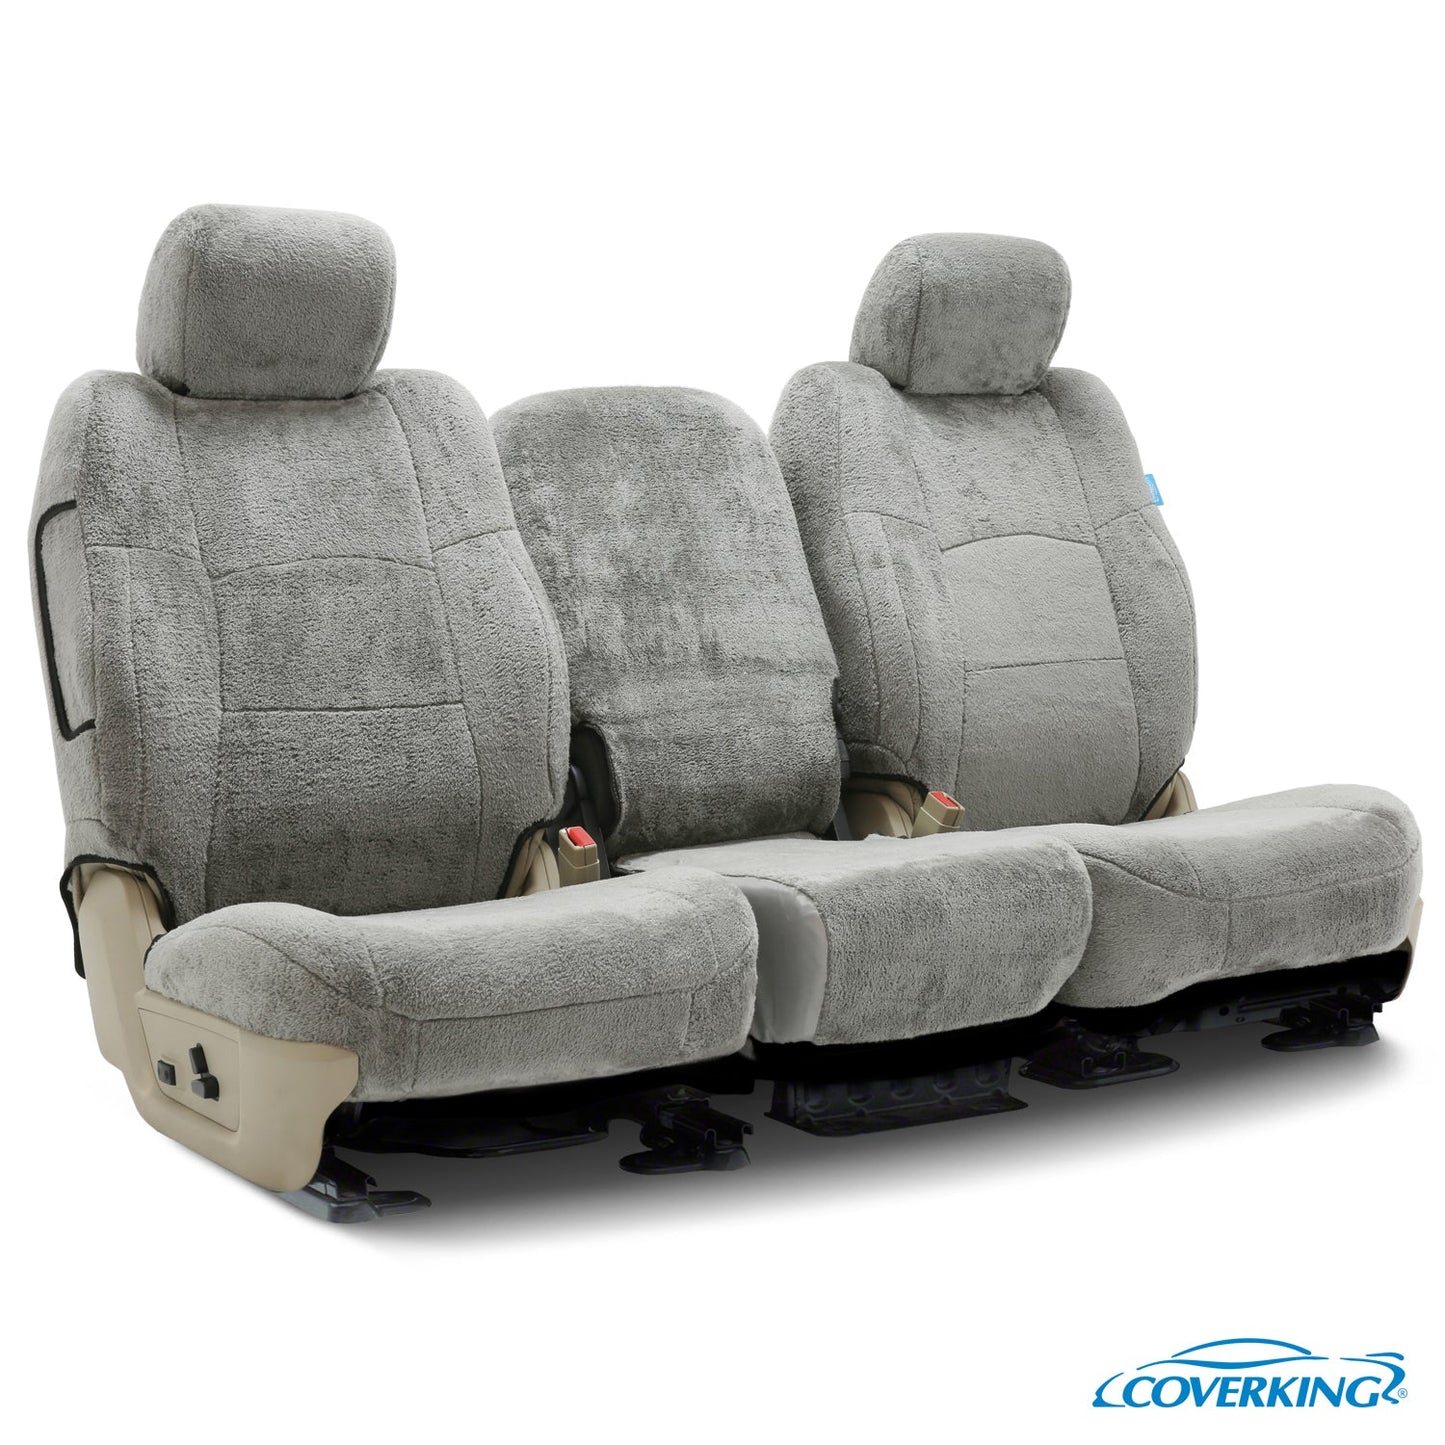 Coverking Snuggleplush™ Seat Covers - Partsaccessoriesusa